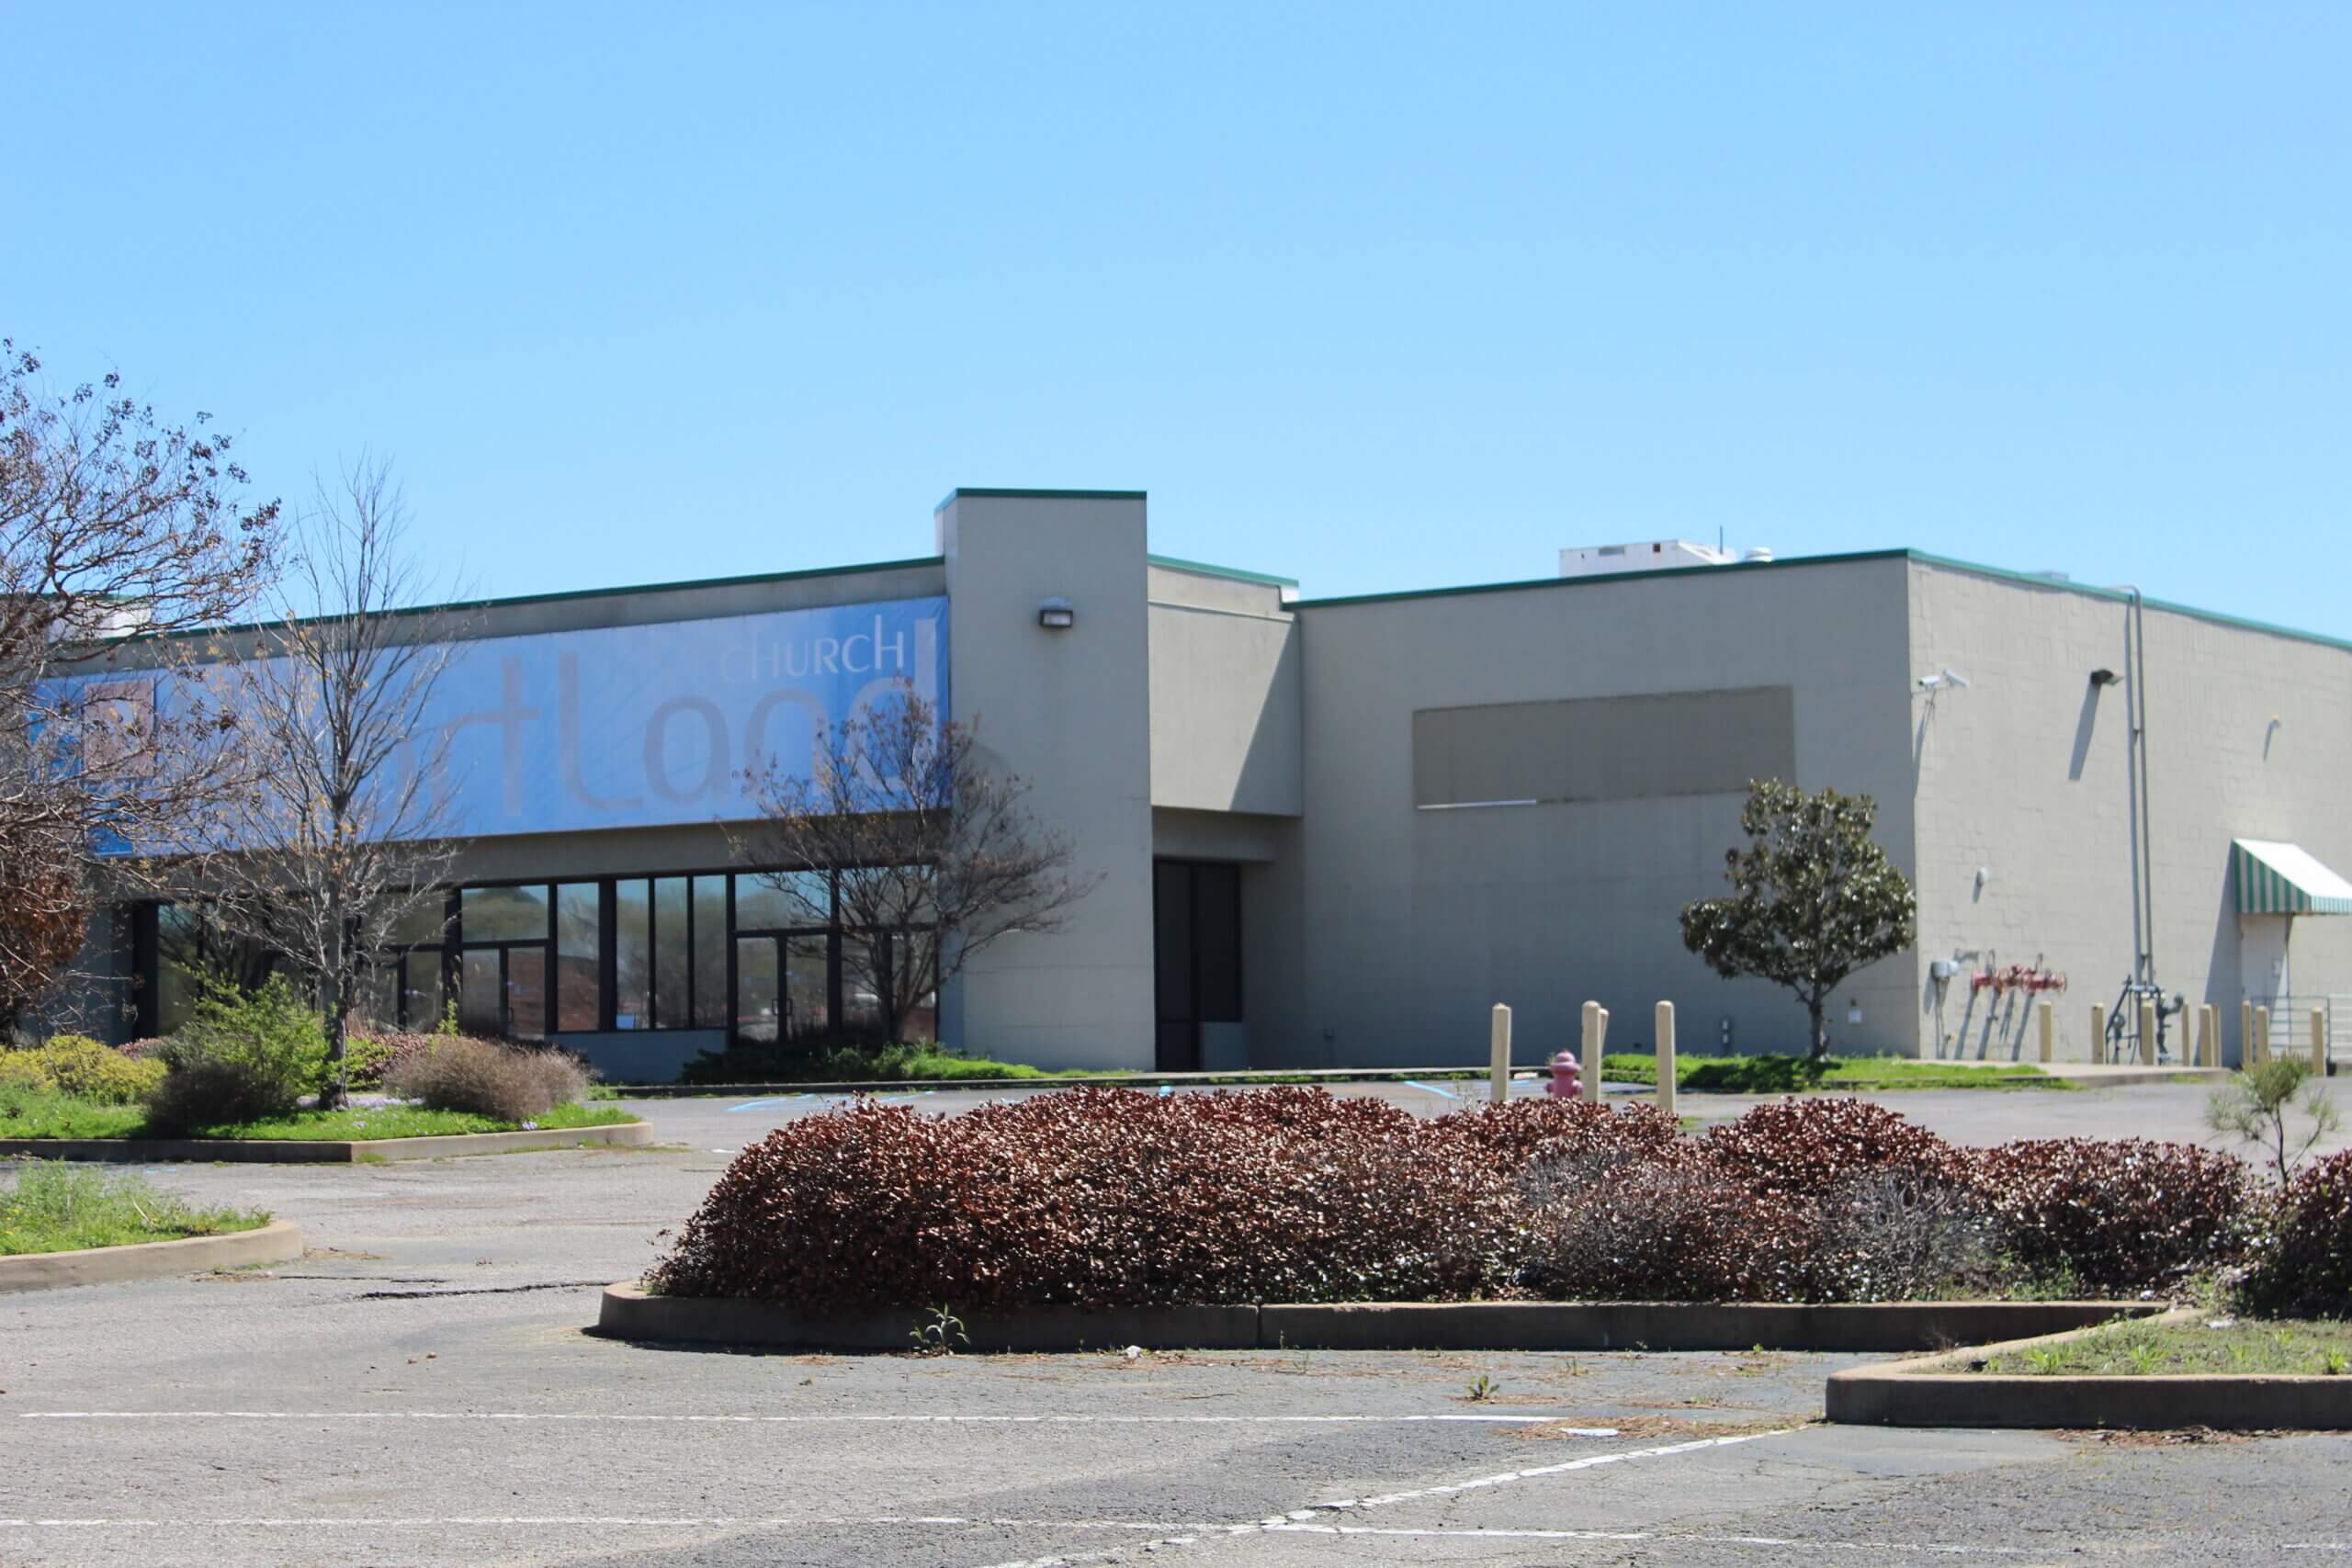 UPDATED: City announces sale of vacant Stateline Road building